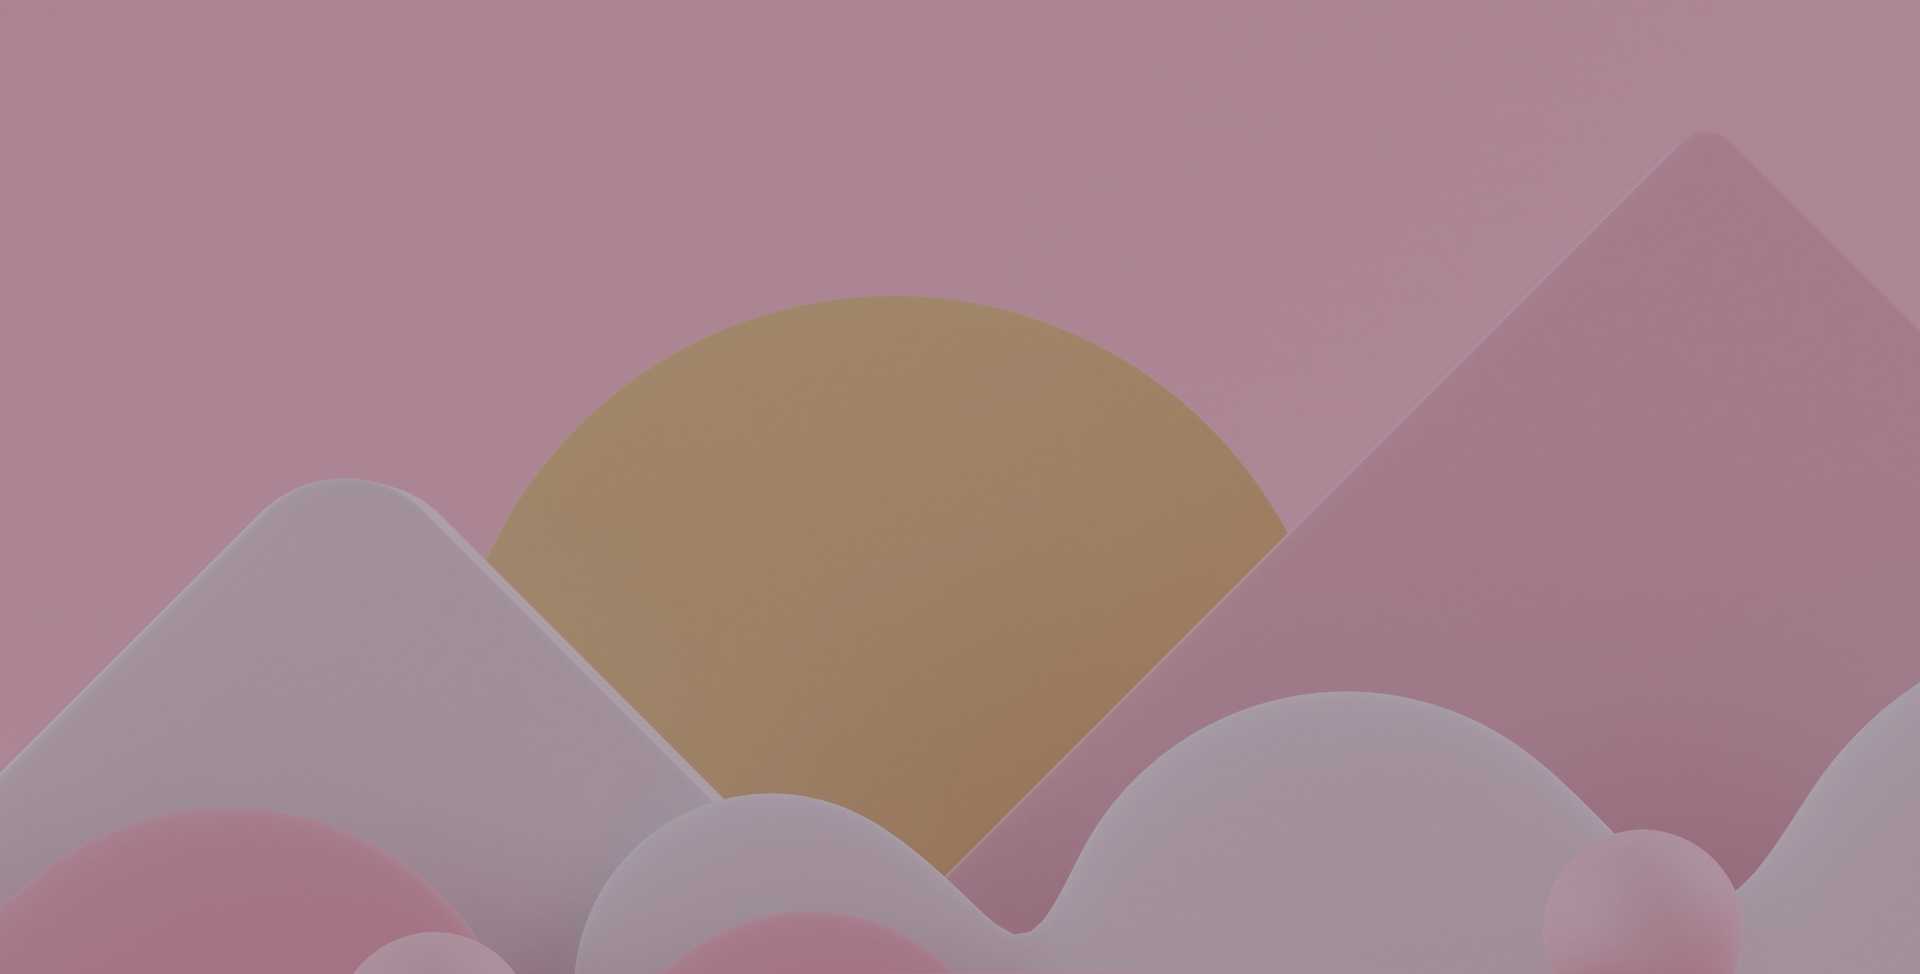 Abstract rendering of pink and white mountains against the backdrop of a pink sky with a large yellow sun, representing health and wellbeing